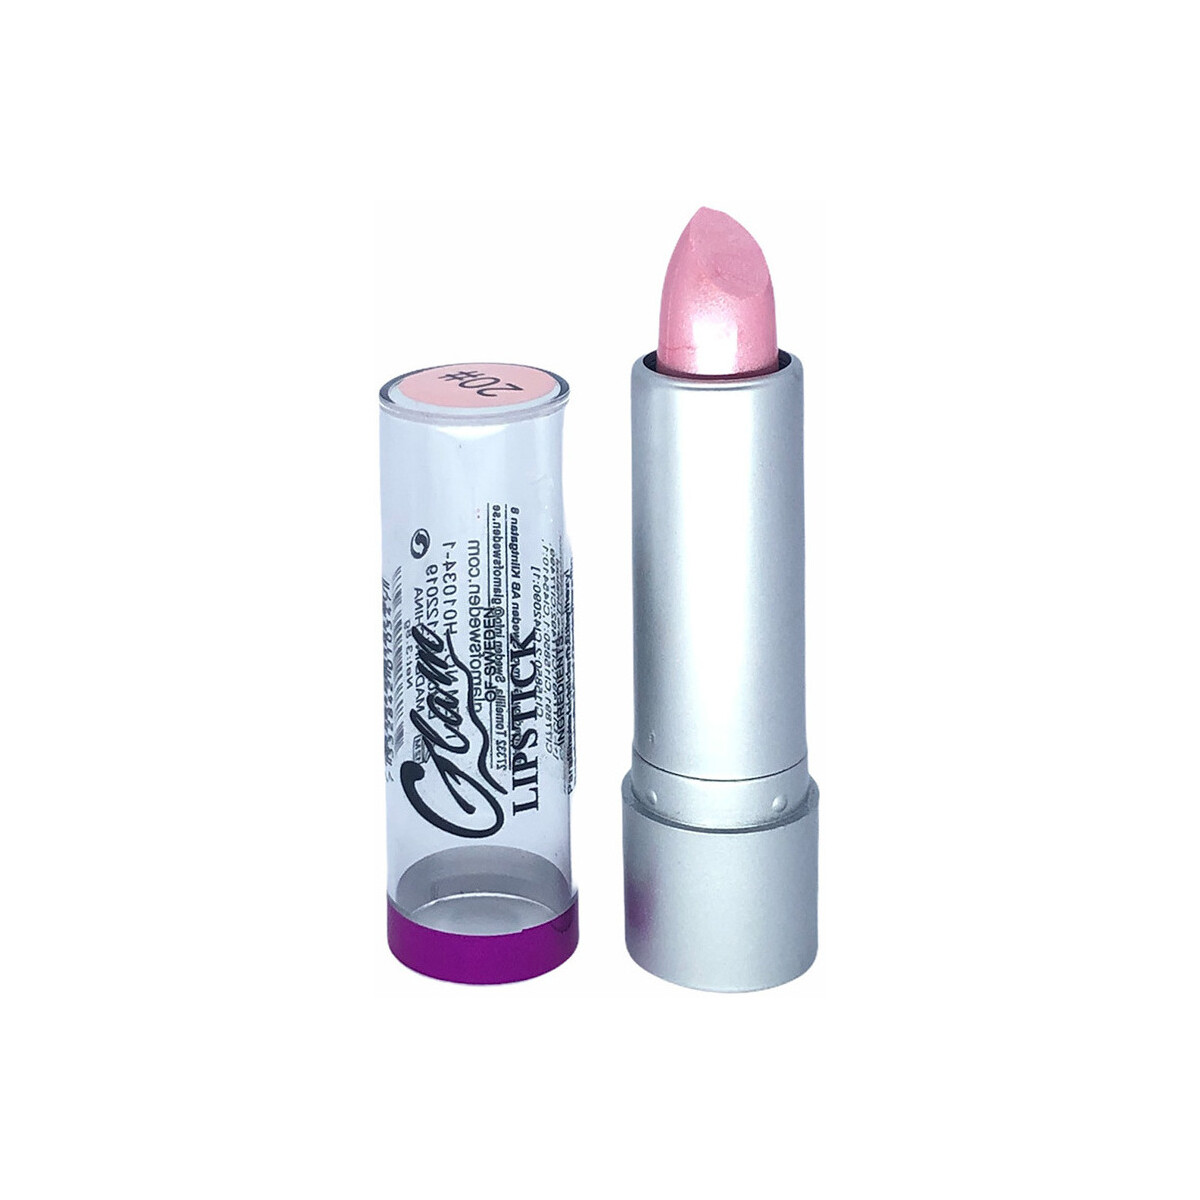 Bellezza Donna Rossetti Glam Of Sweden Silver Lipstick 20-frosty Pink 